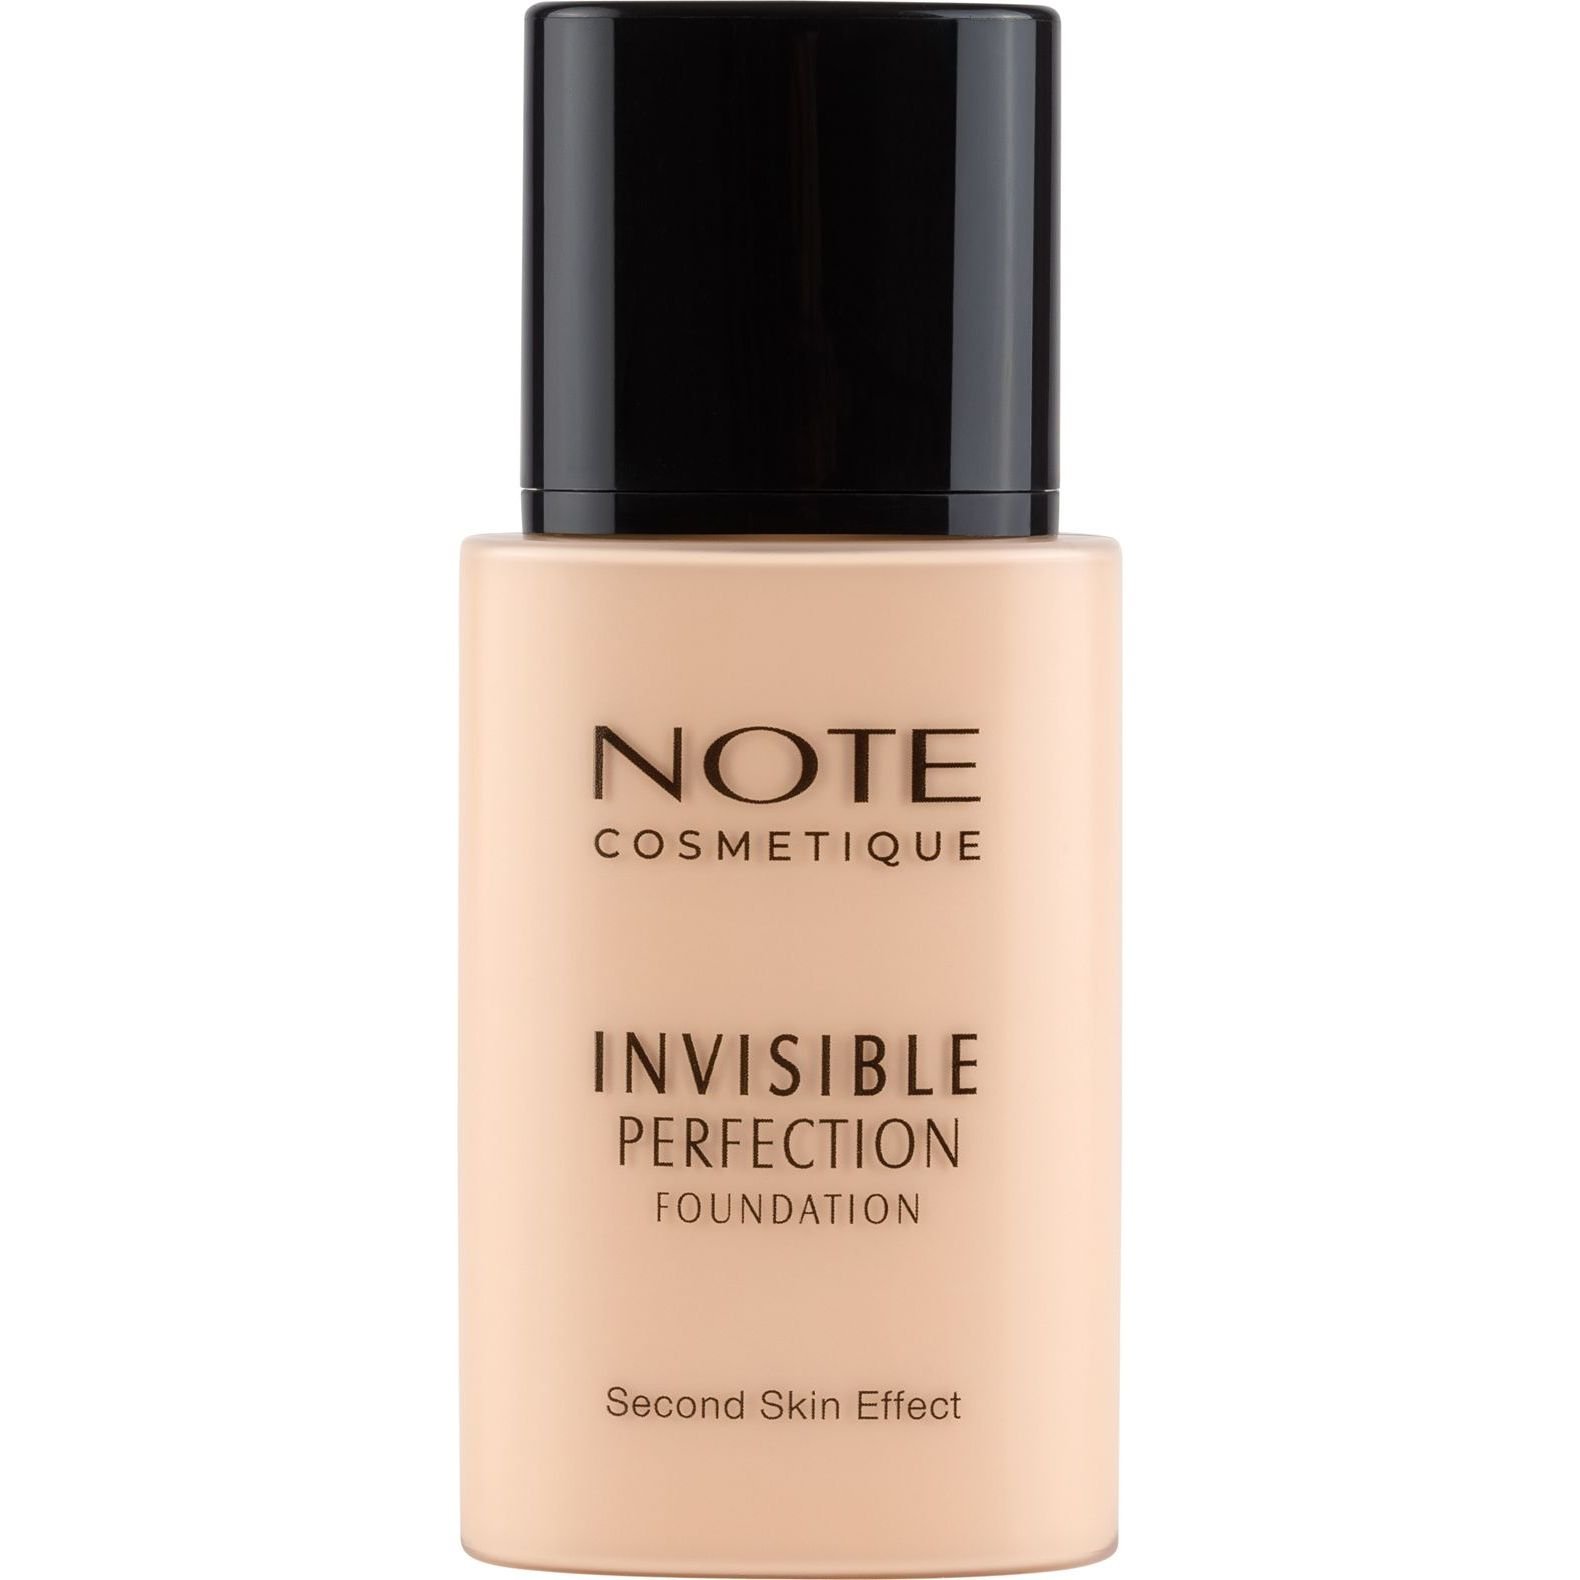 Тональная основа Note Cosmetique Invisible Perfection Foundation тон 120 (Natural Ivory) 35 мл - фото 1